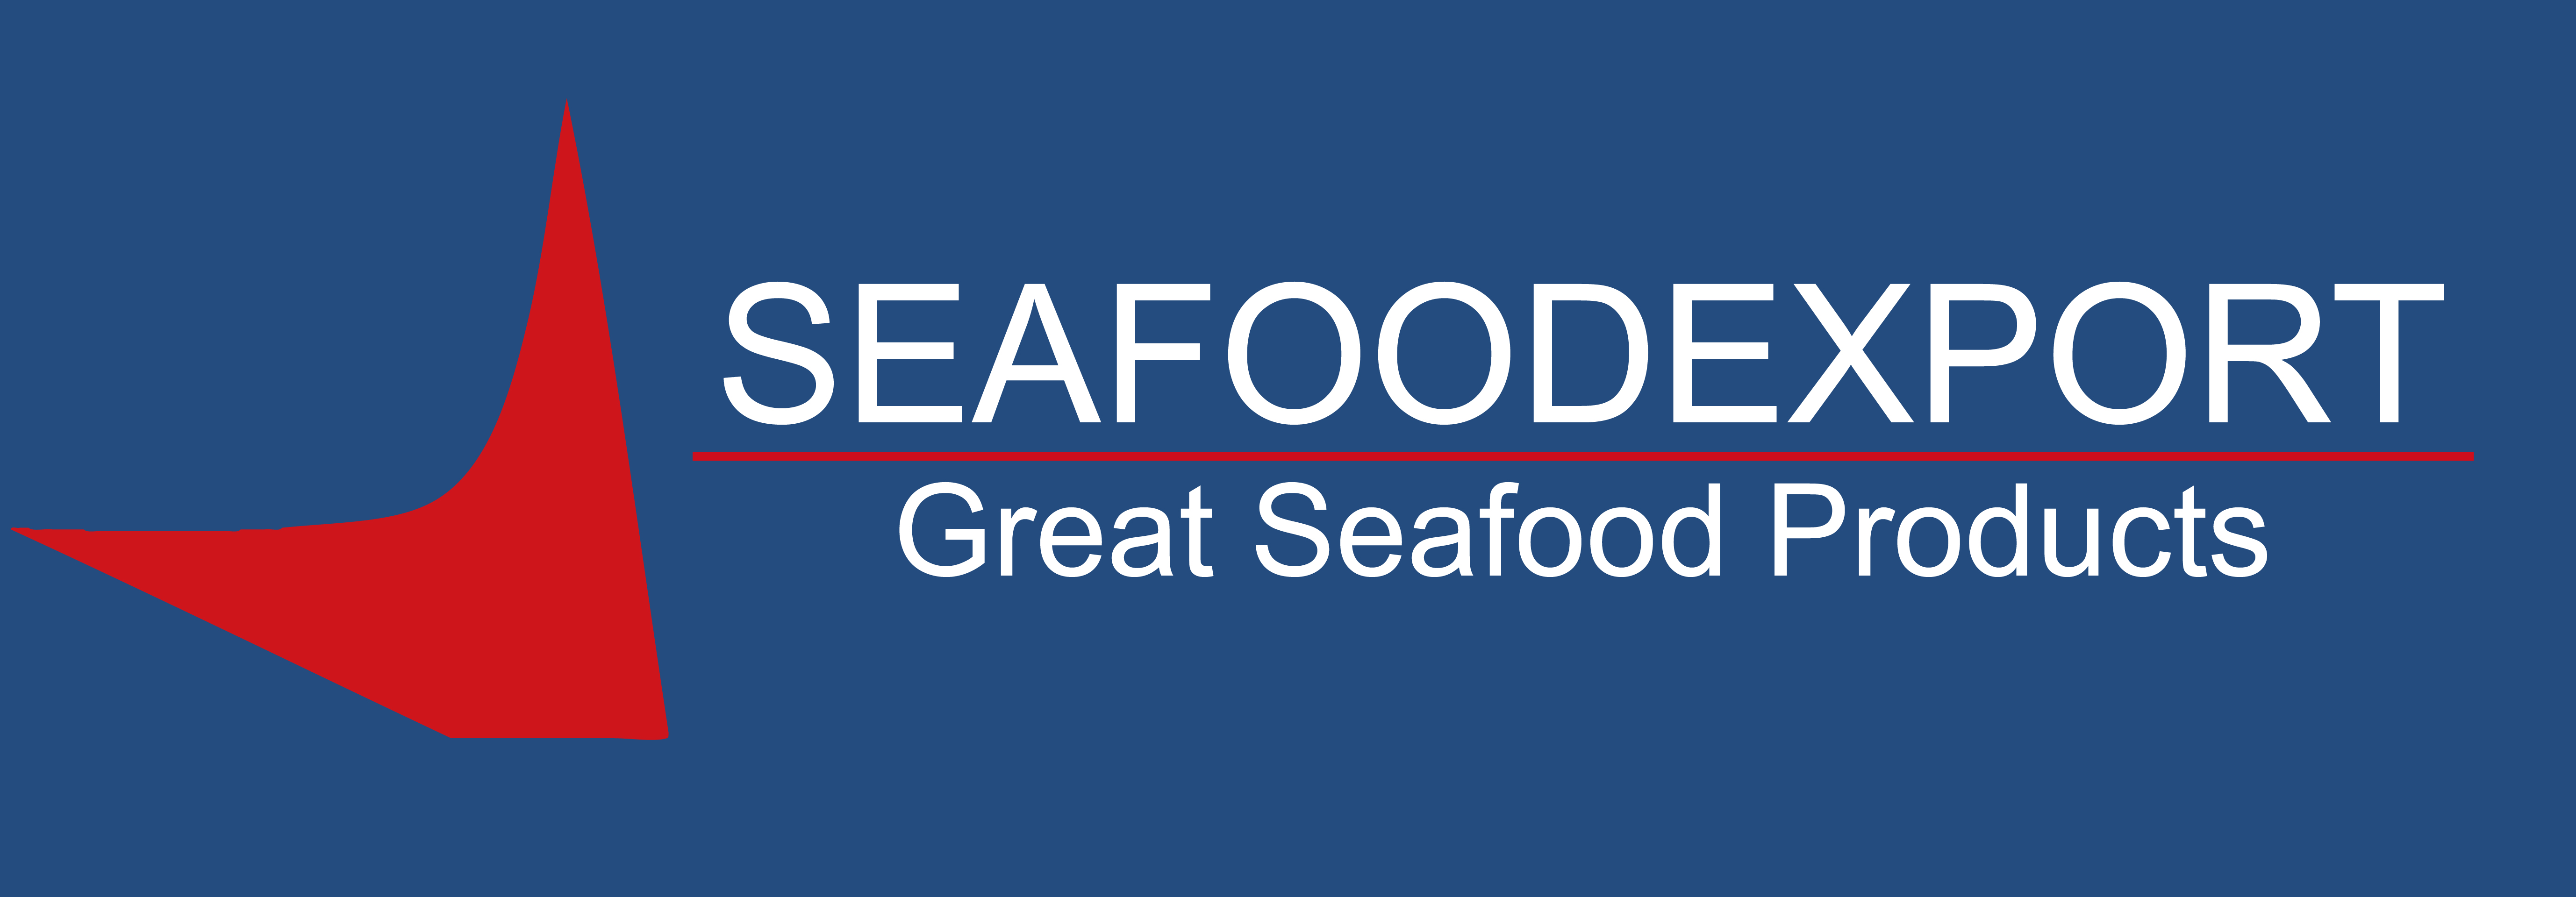 Seafood Export Achieves